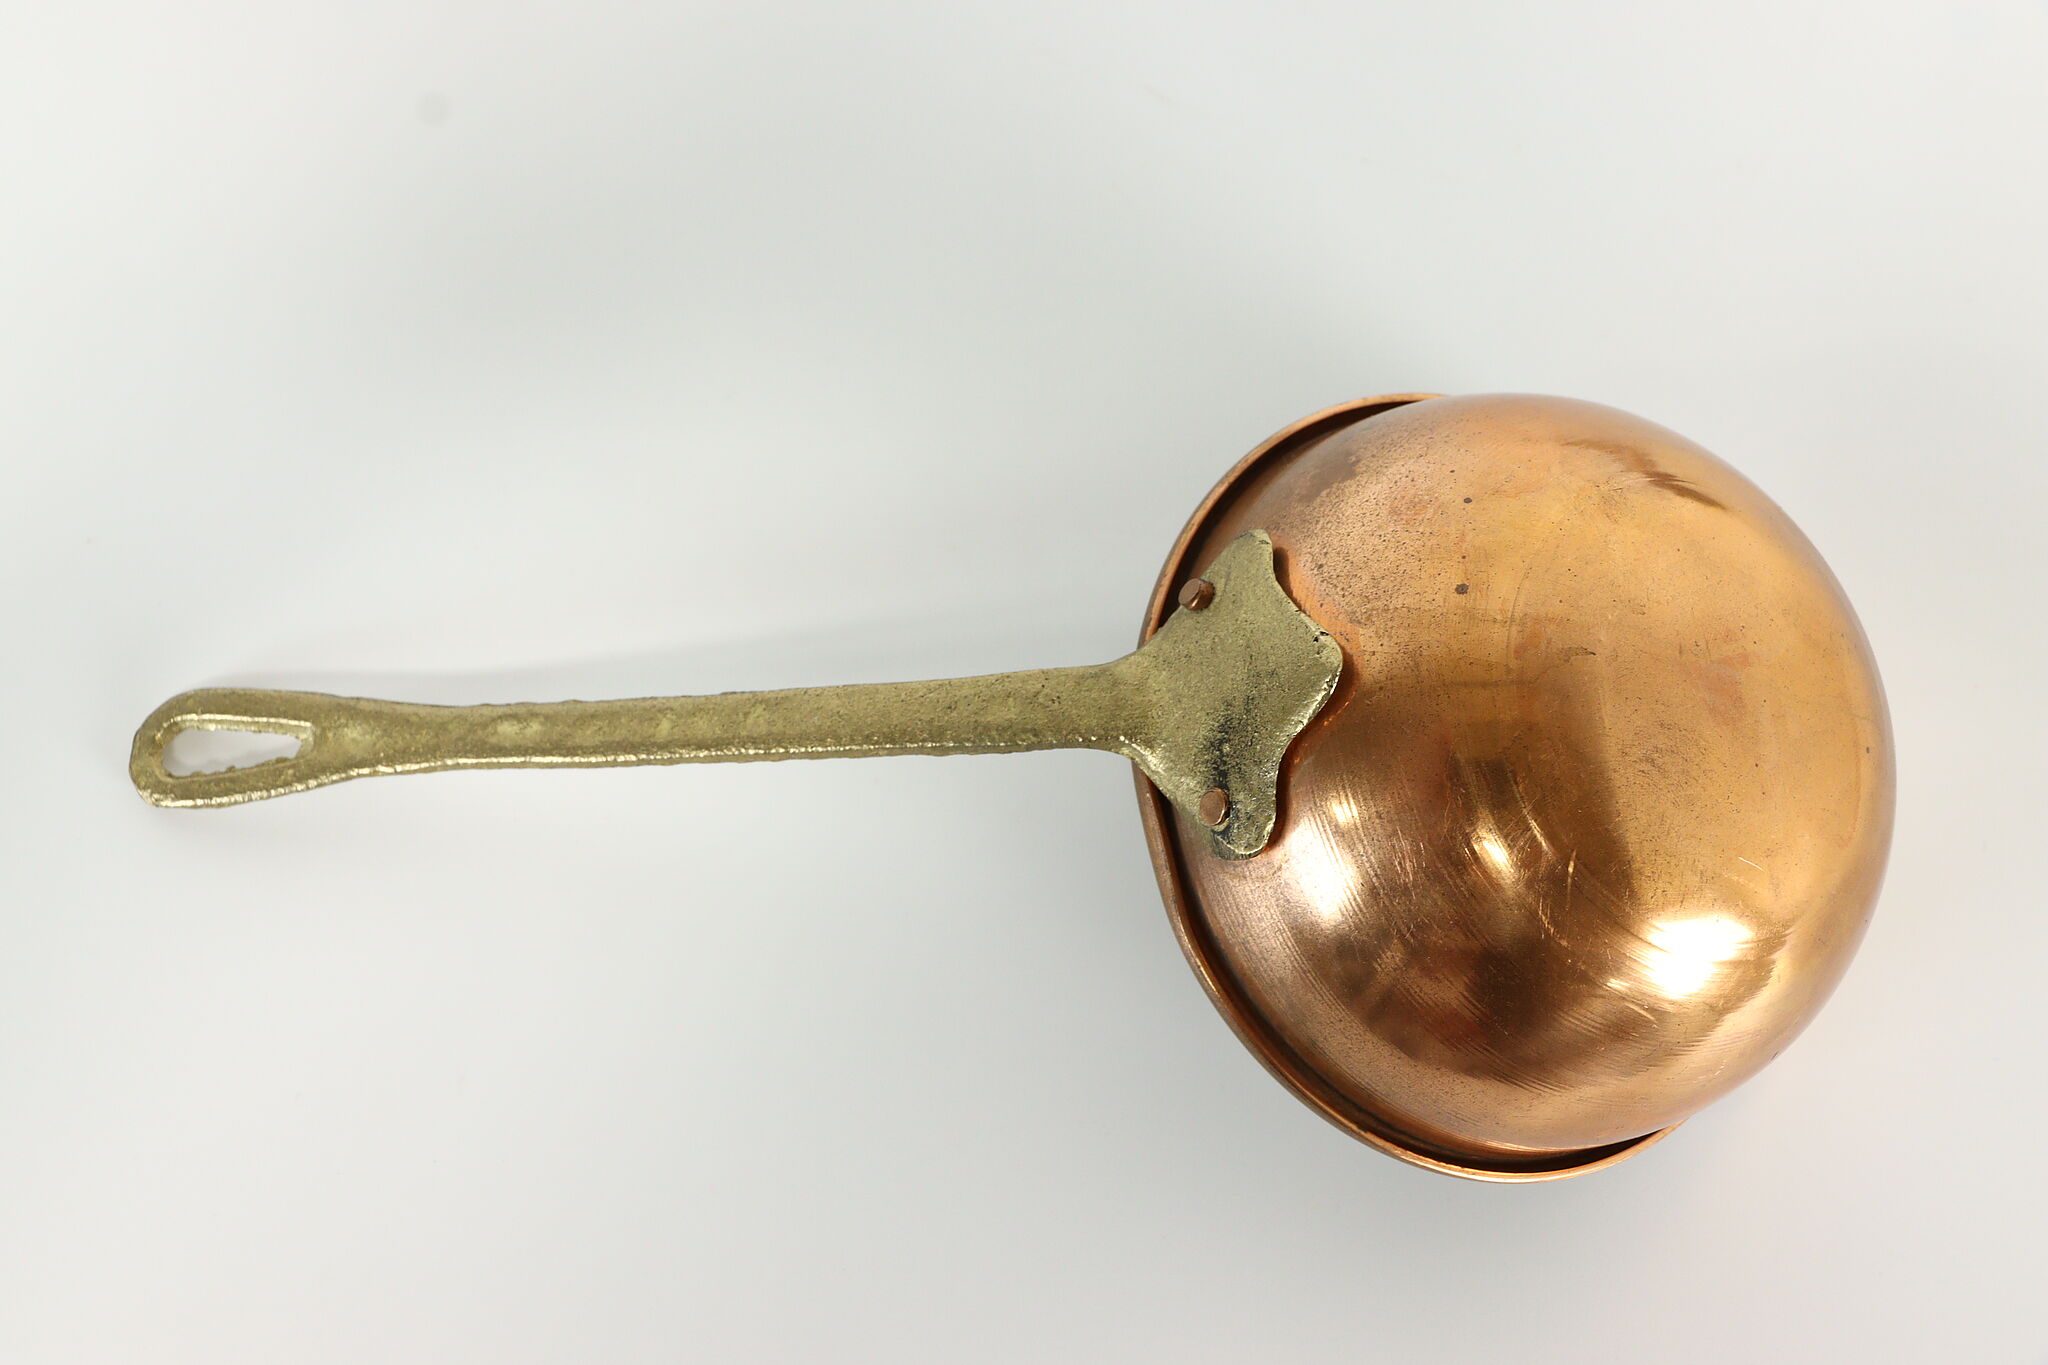 Buy Brass Serving Ladles With Wooden Handles Set Of 4